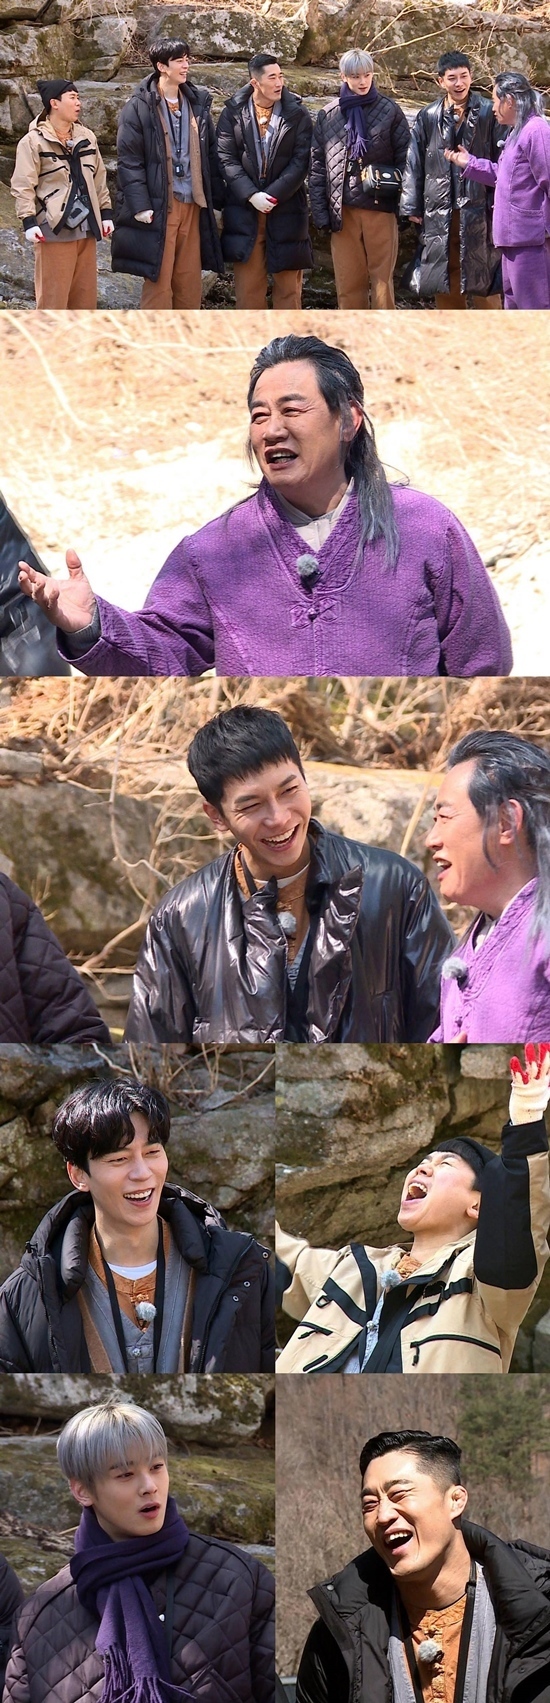 Lee Kyung-kyus harsh engagement lessons begin.On SBS All The Butlers, which will be broadcast on April 4, Lee Kyung-kyu, the god of entertainment, who holds up the entertainment industry in Korea, will appear as master.In the last broadcast, Lee Kyung-kyu appeared as a natural person who abandoned the world first and returned to the arms of Mother Nature before the world abandoned him, causing curiosity.Master Lee Kyung-kyu, who showed a visual, a real nature, with a long hair and improved hanbok.I will be responsible for 10 years of entertainment life for members, he said. He anticipated that he would initiate the entertainment know-how he had cultivated.Lee Kyung-kyu is said to have shown off the aspect of the entertainment master by initiating only 100% entertainment axis, which has been melting for 40 years.The members dreamed of the next generation entertainment master connecting Lee Kyung-kyu and burned the school district.